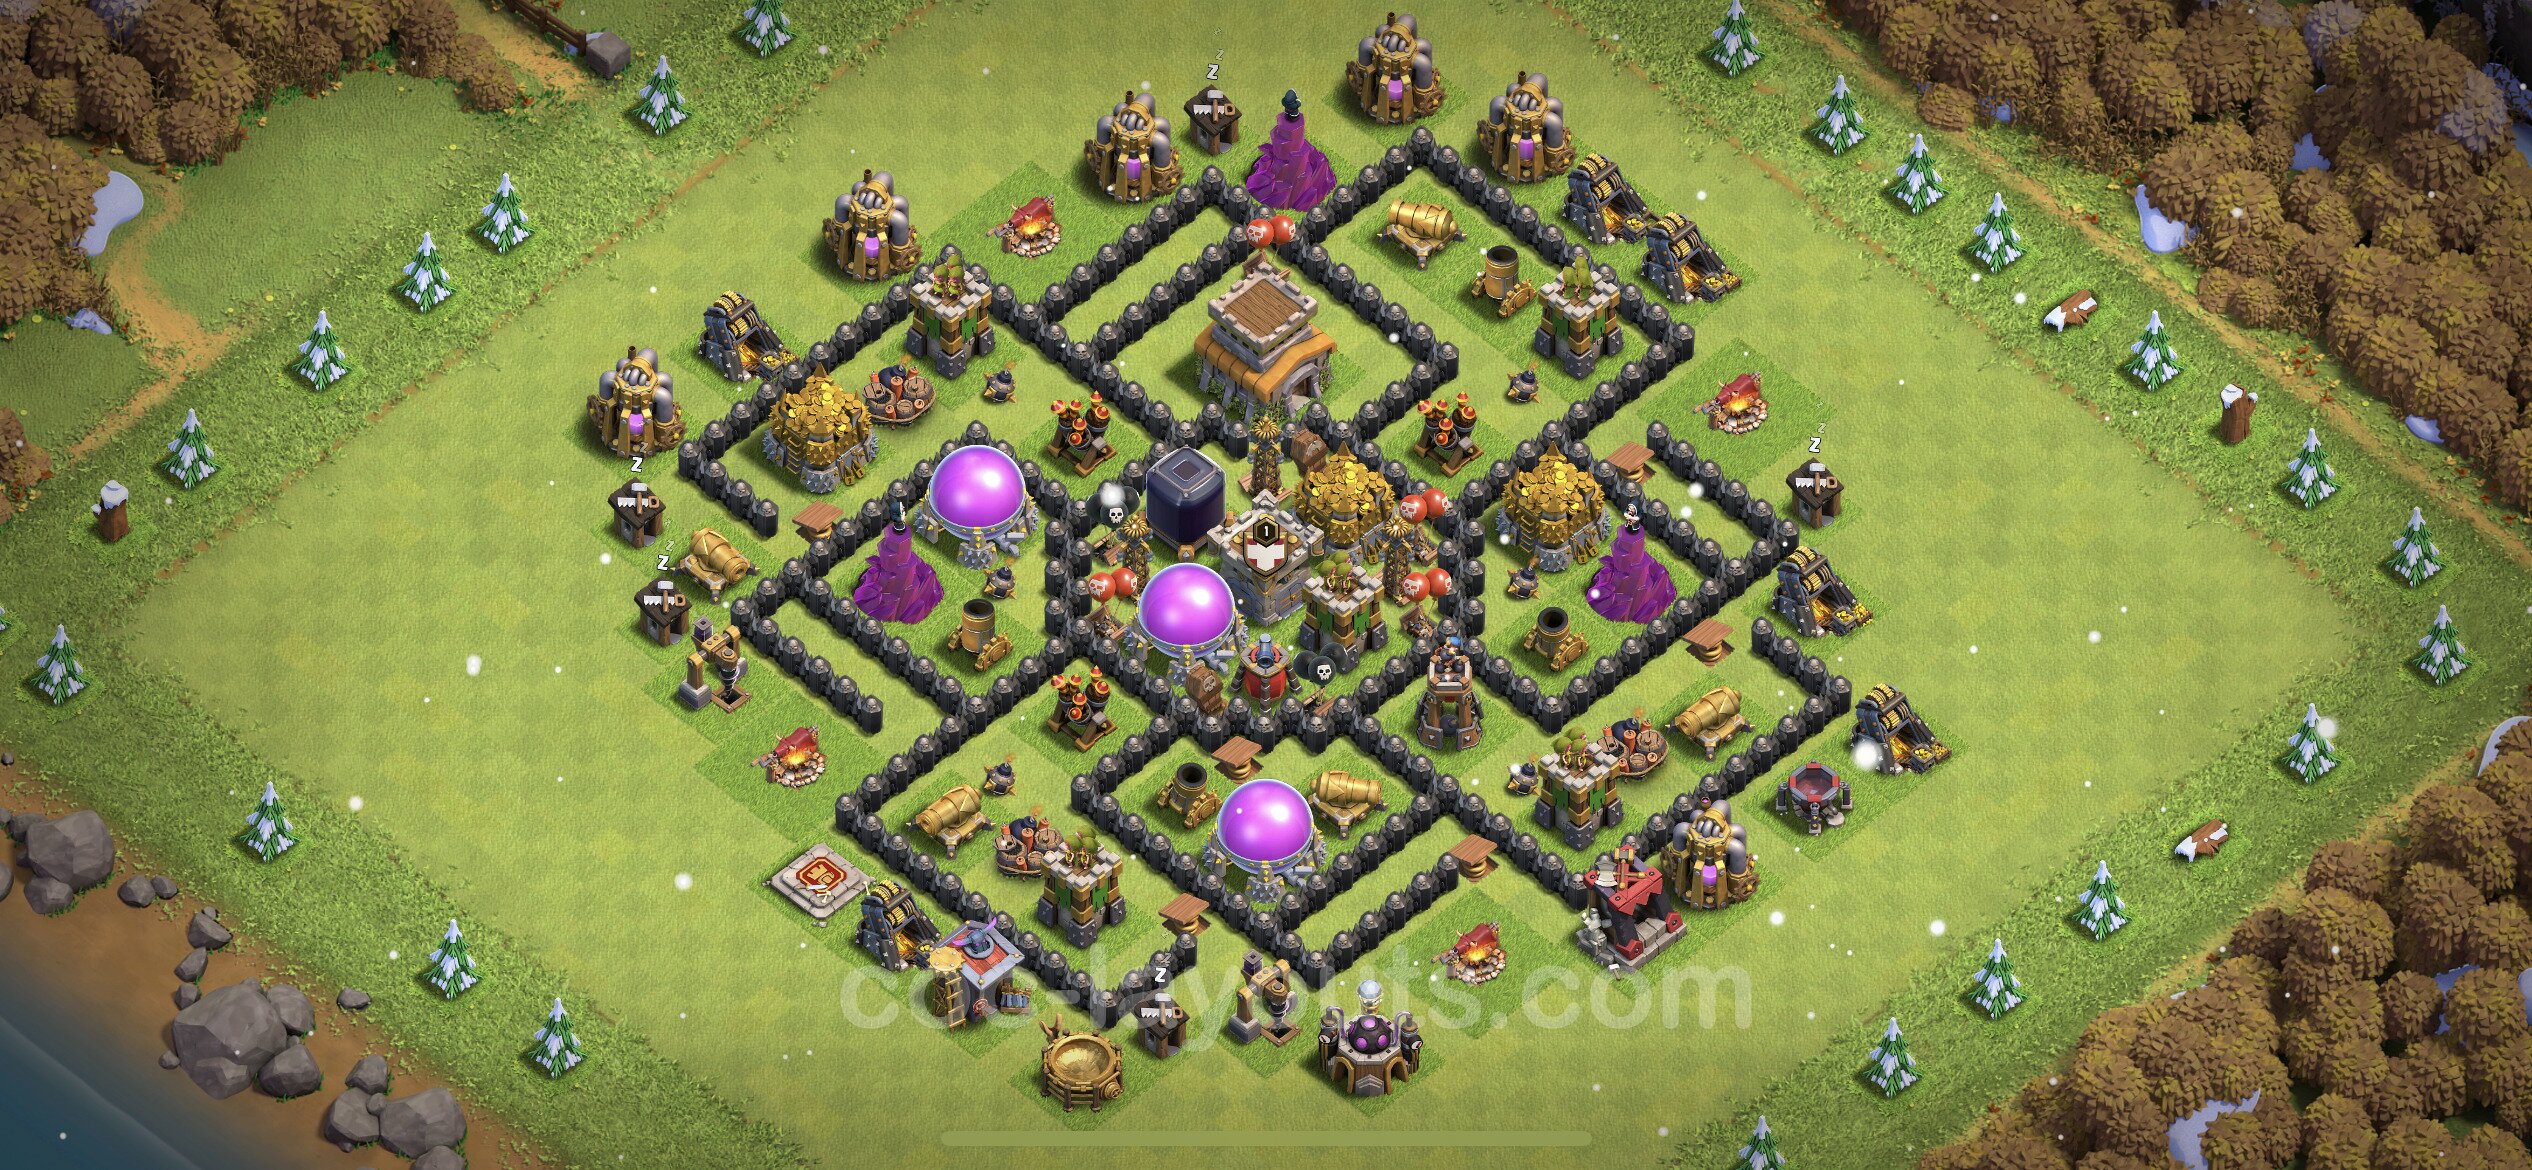 Farming Base TH8 with Link - plan / layout / design - Clash of Clans ...